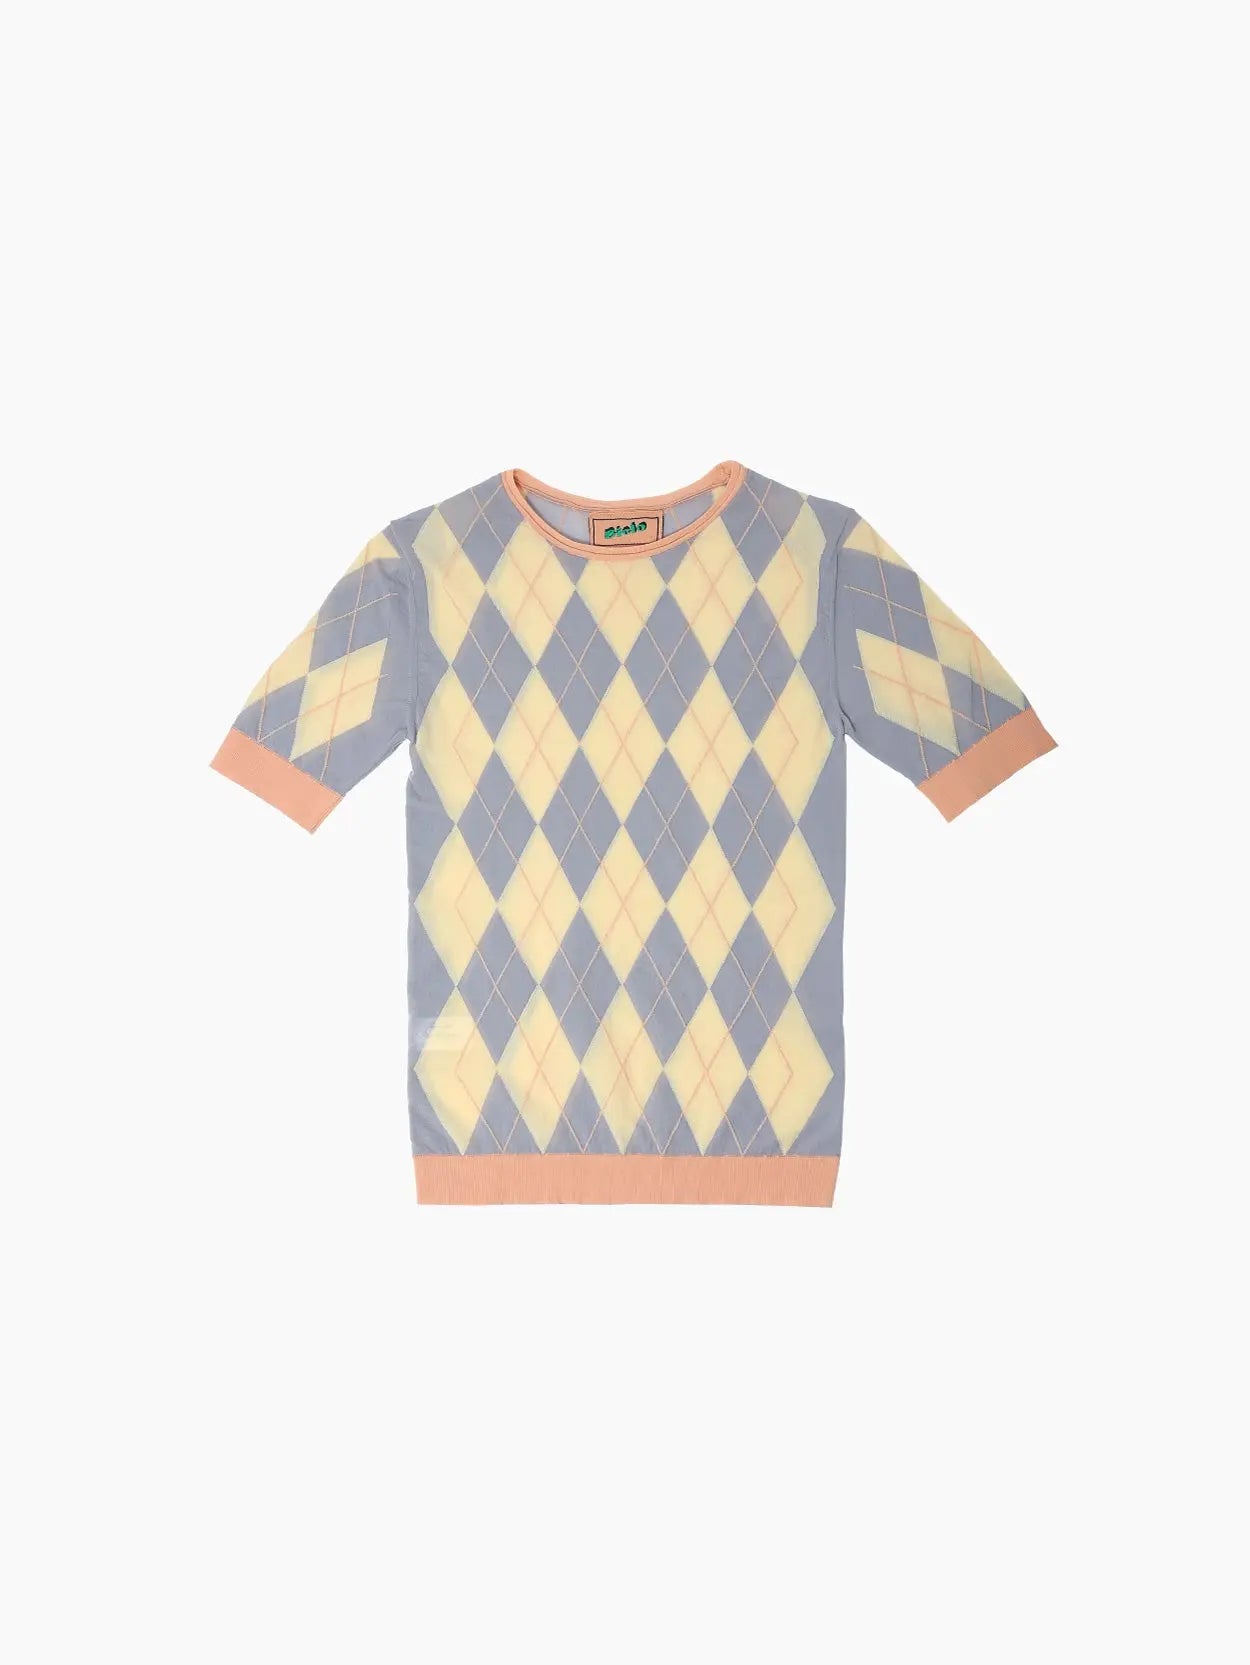 A short-sleeve sweater with a pastel argyle pattern featuring diamond shapes in light yellow and blue on a beige background. The Jes Sweater Peach by Bielo, available at Bassalstore in Barcelona, has light pink ribbed cuffs at the sleeves, neckline, and hem.